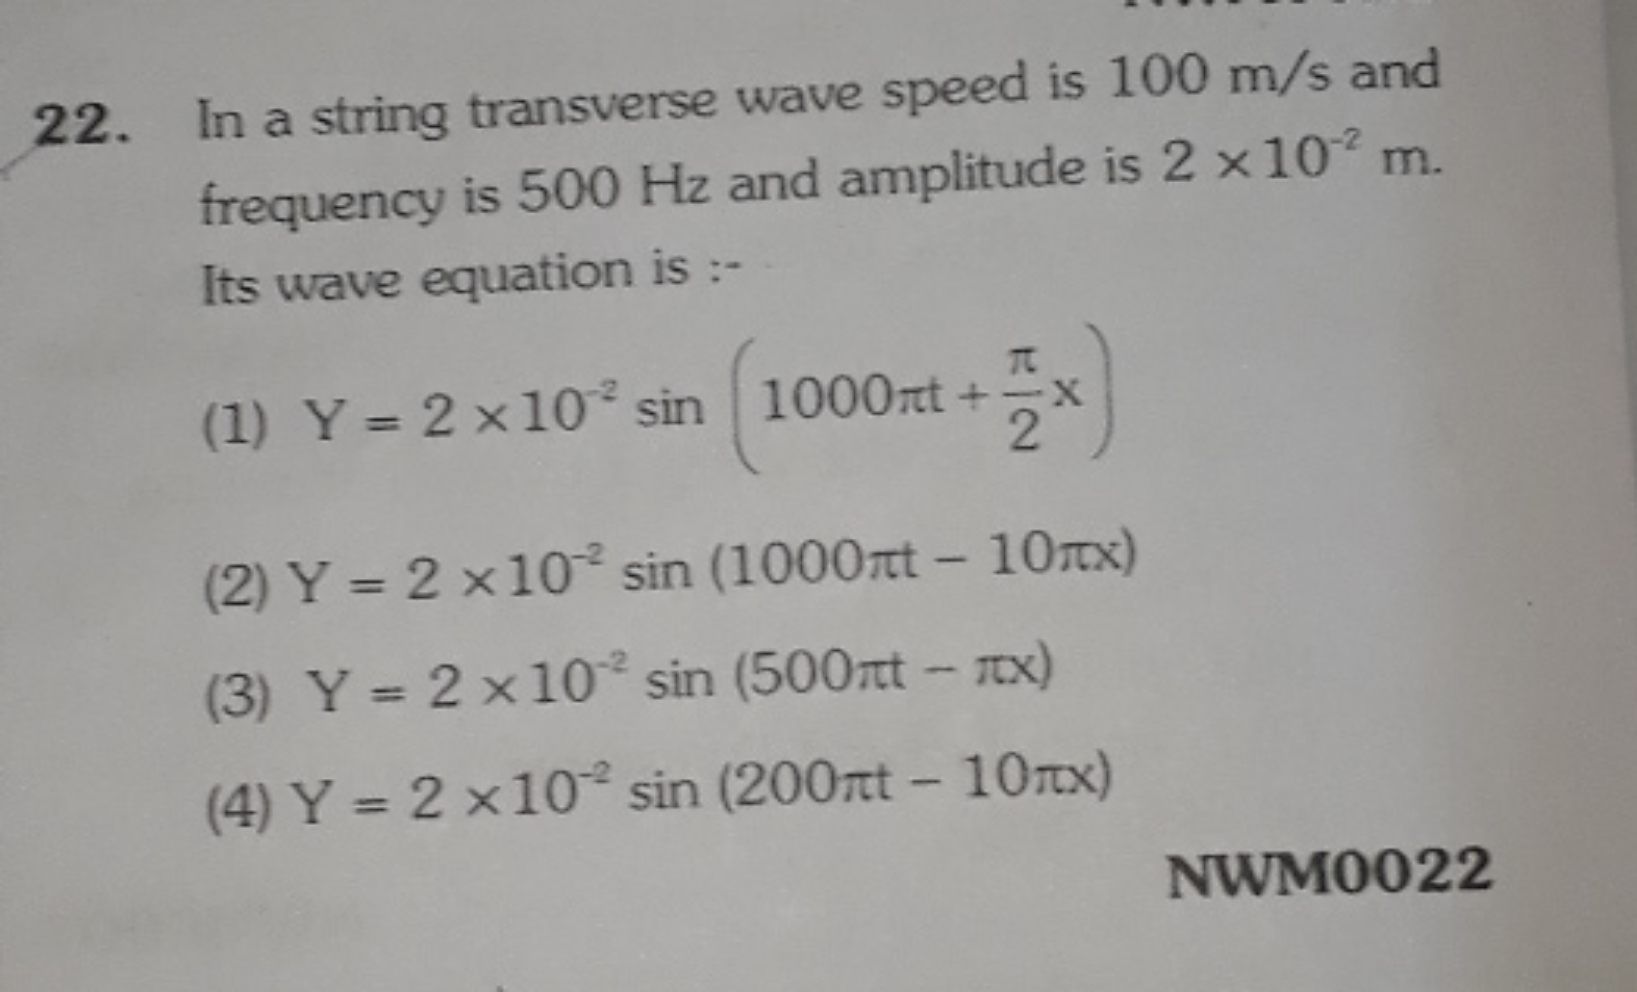 In a string transverse wave speed is 100 m/s and frequency is 500 Hz a